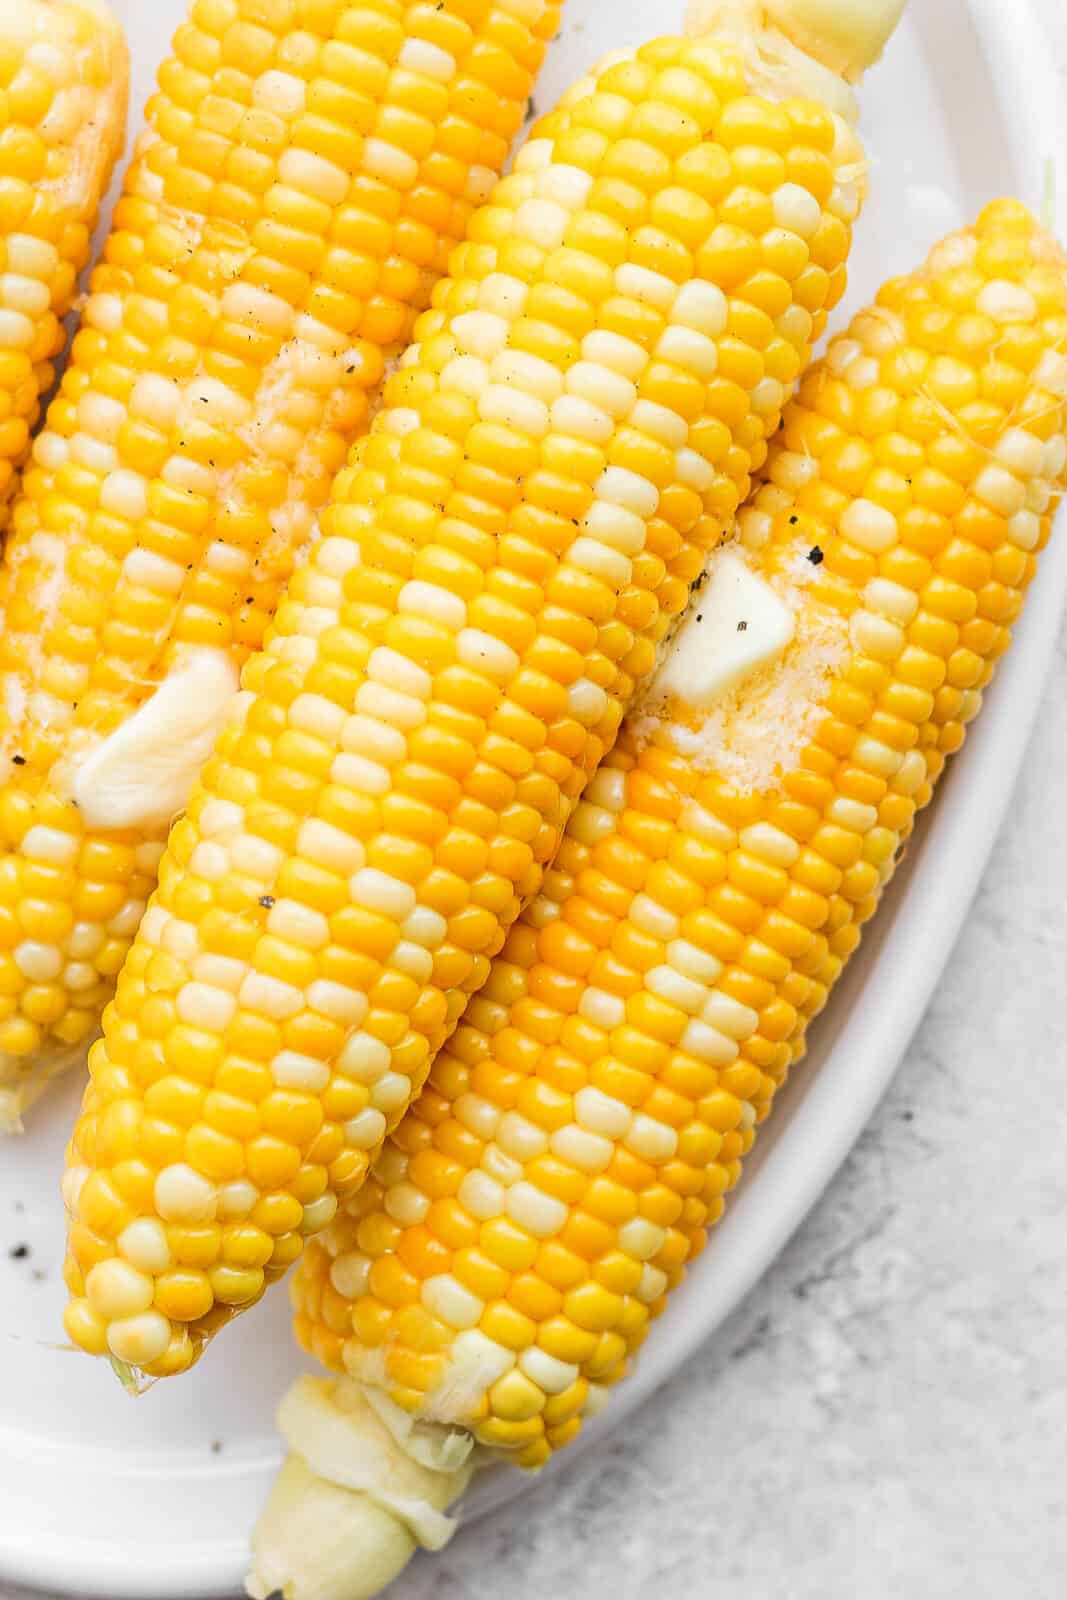 Boiled corn with butter, salt, and pepper.